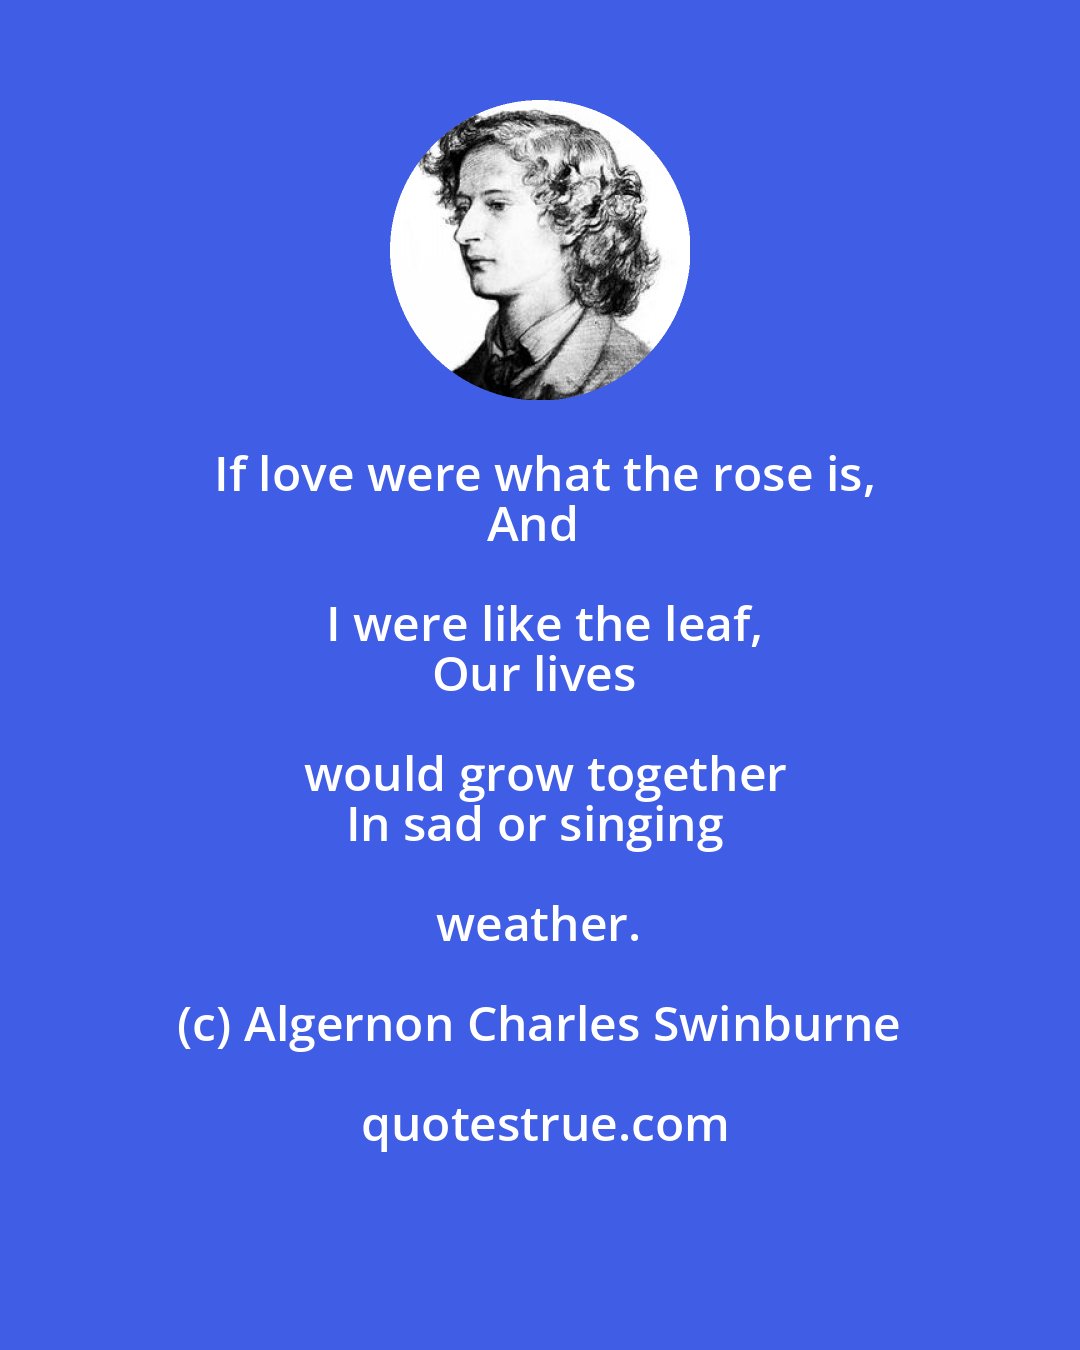 Algernon Charles Swinburne: If love were what the rose is,
And I were like the leaf,
Our lives would grow together
In sad or singing weather.